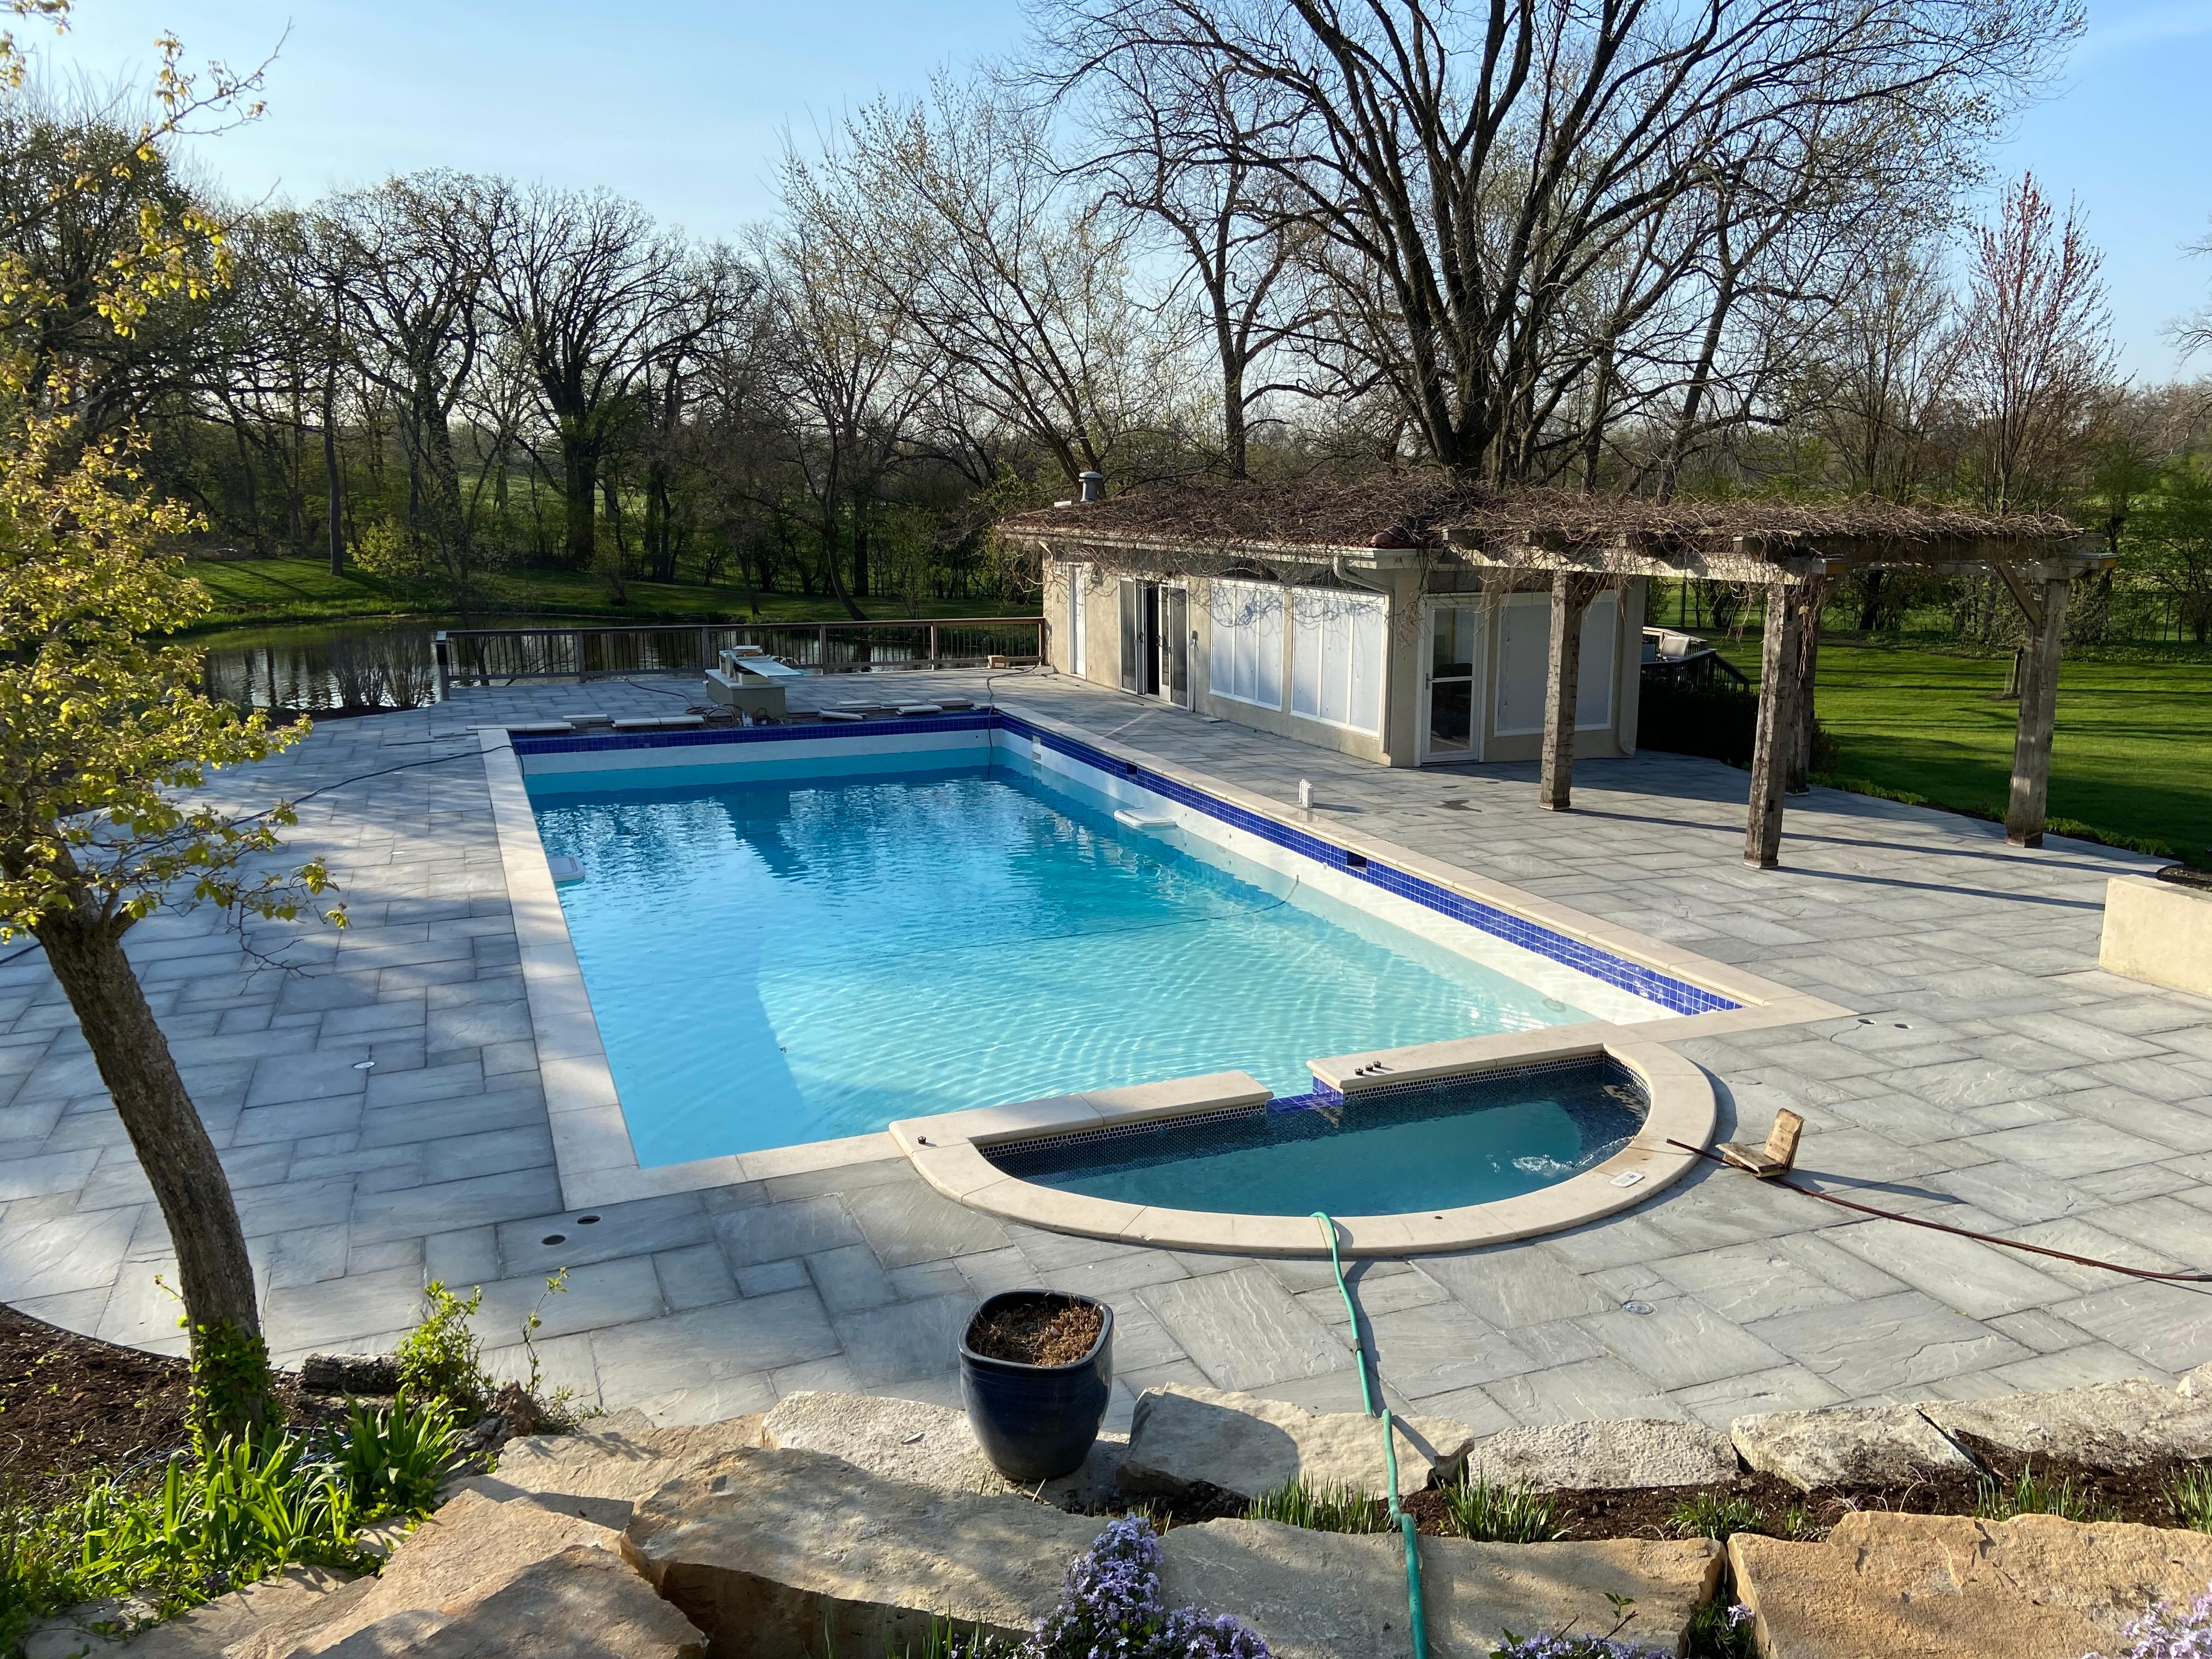 5 Ways to Keep Your Pool in Great Shape This Year